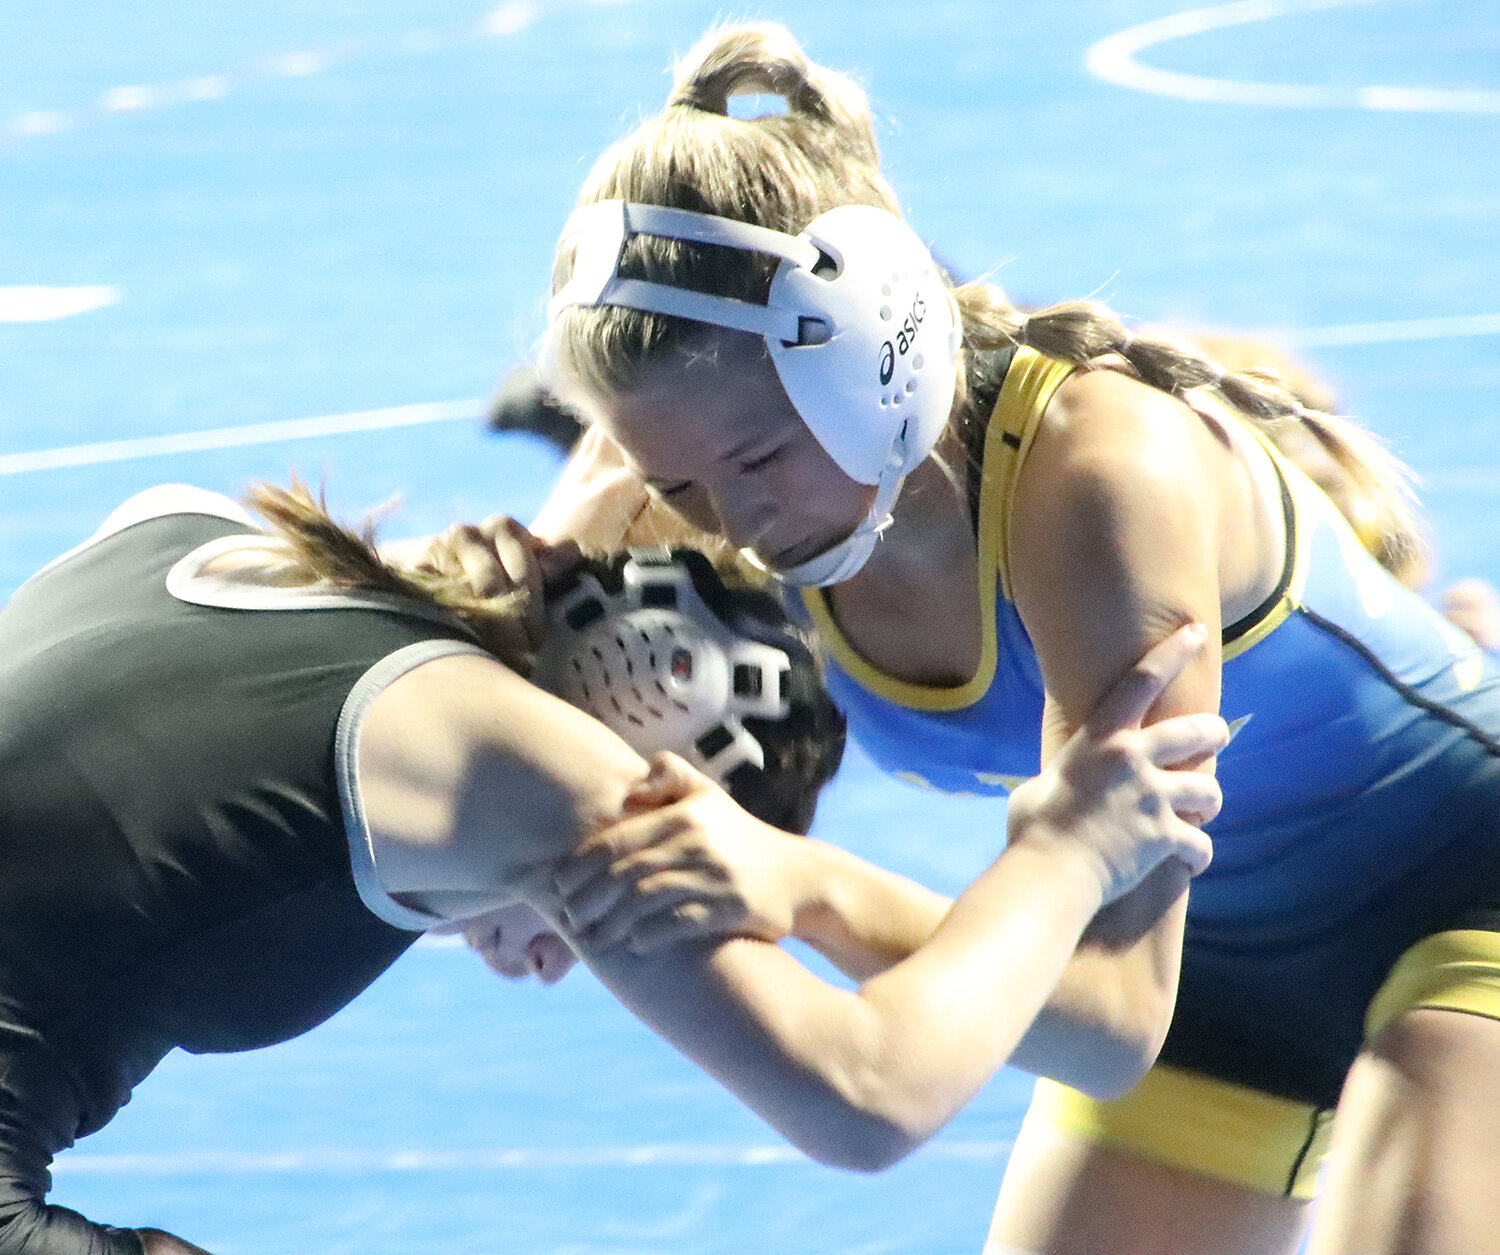 Wilton sophomore Audra Coss clinched a spot in the state tournament via the 110-pound weight class